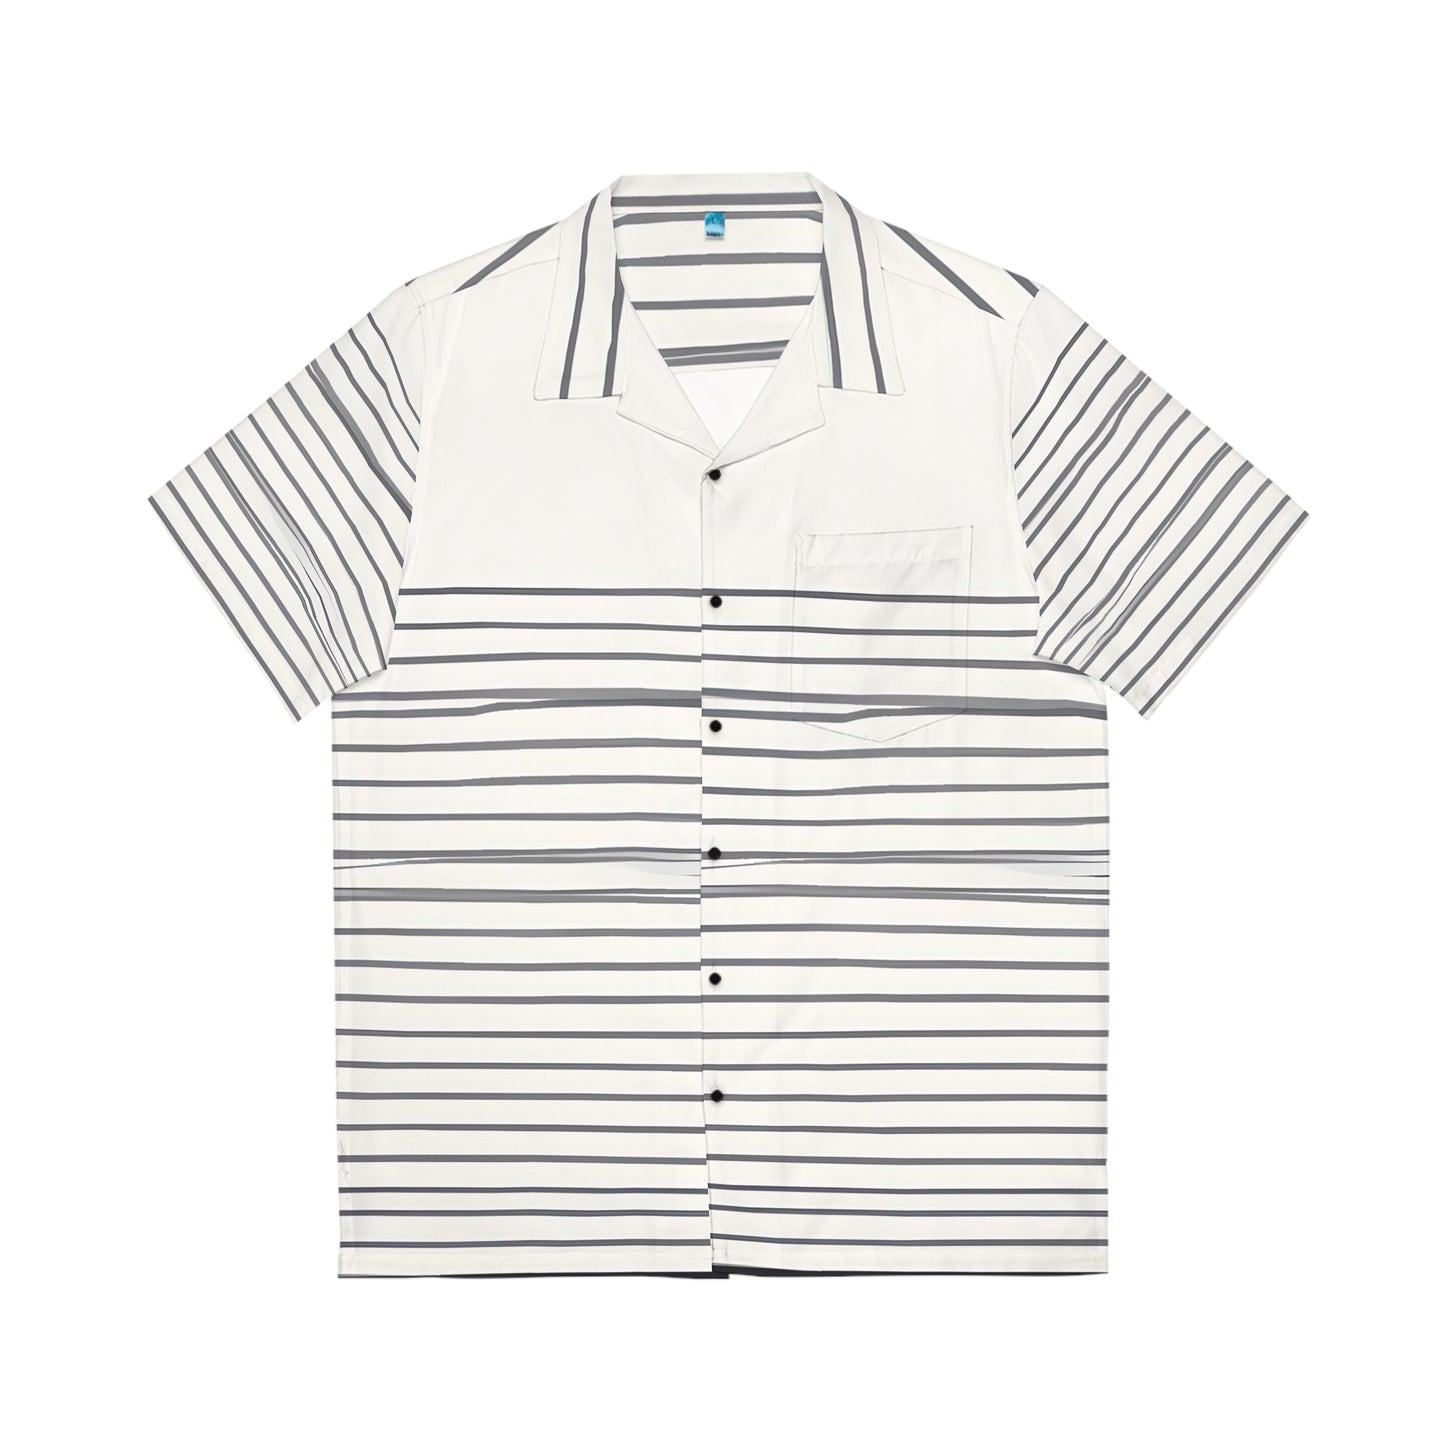 Lino Winifred - Men's Button-Down Short-Sleeve